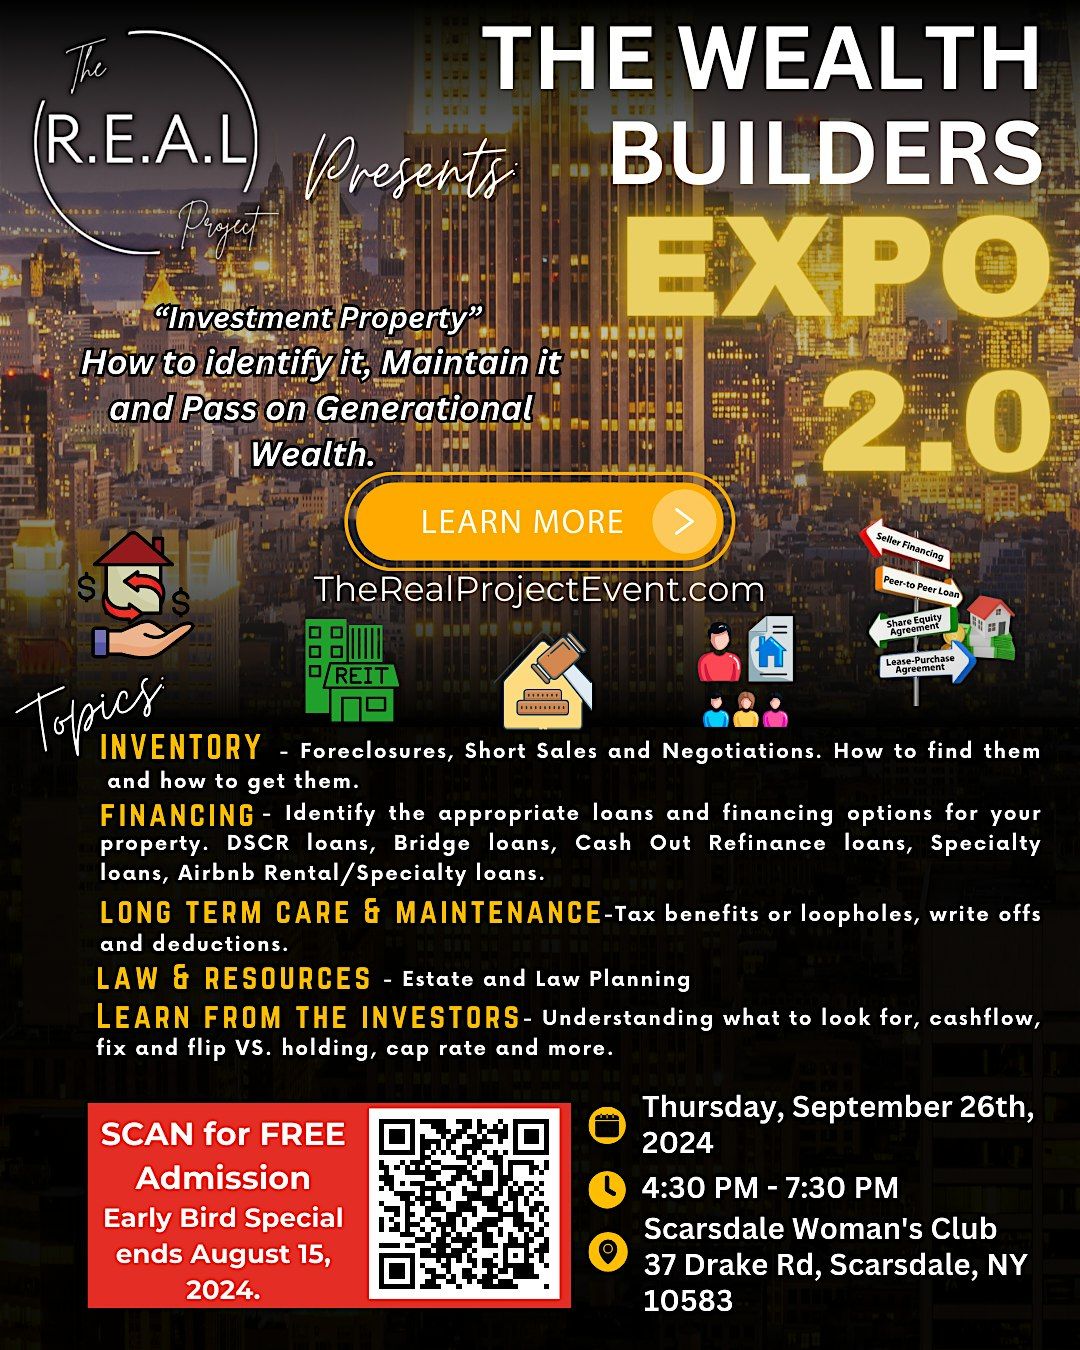 The Wealth Builders EXPO 2.0